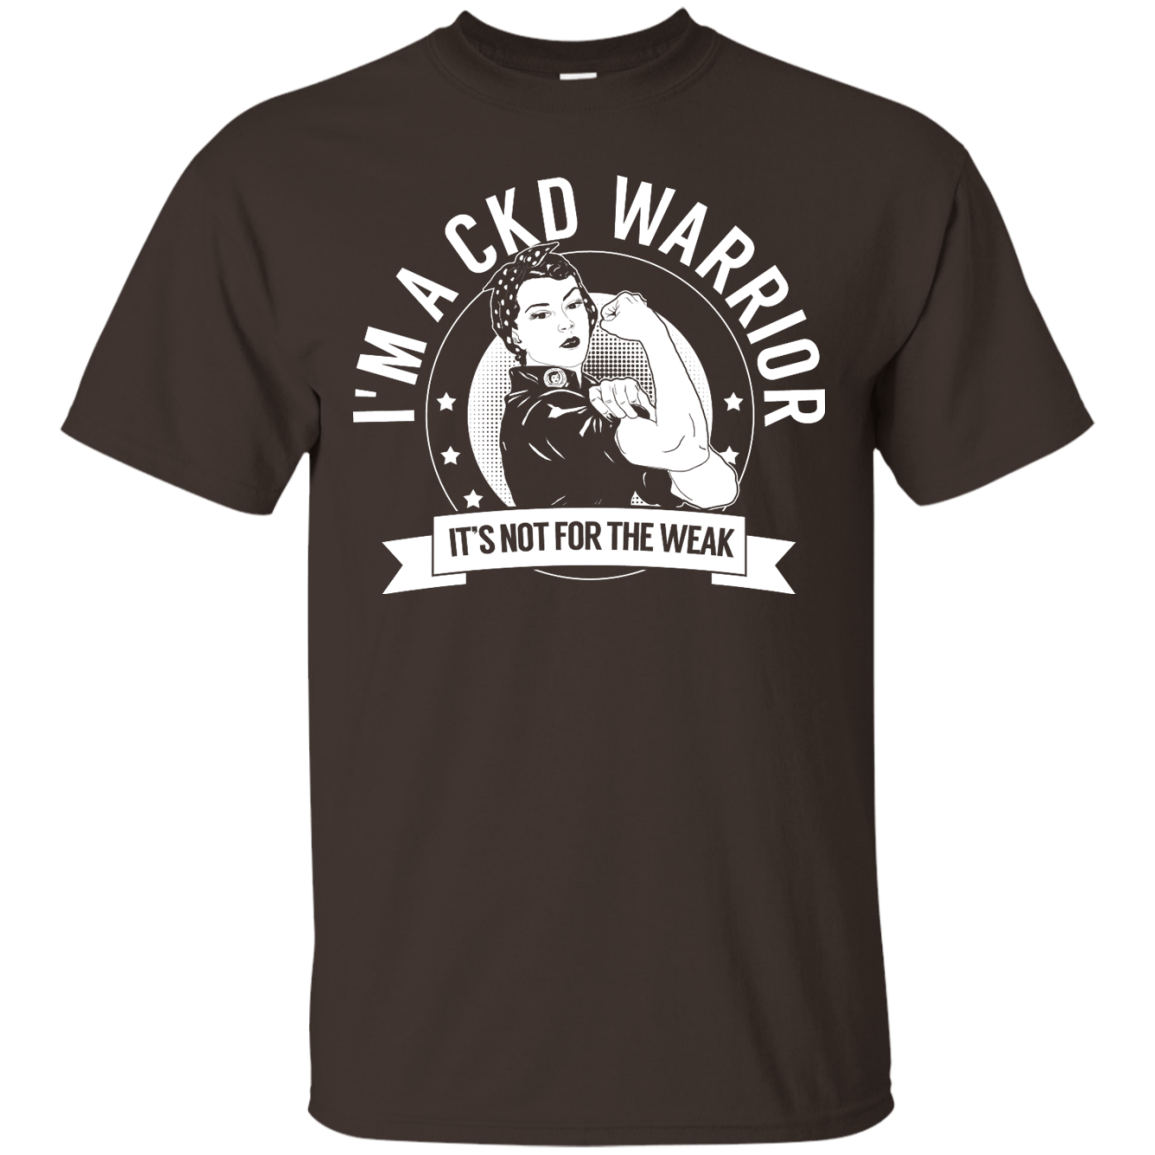 Chronic Kidney Disease - CKD Warrior Not For The Weak Unisex Shirt - The Unchargeables